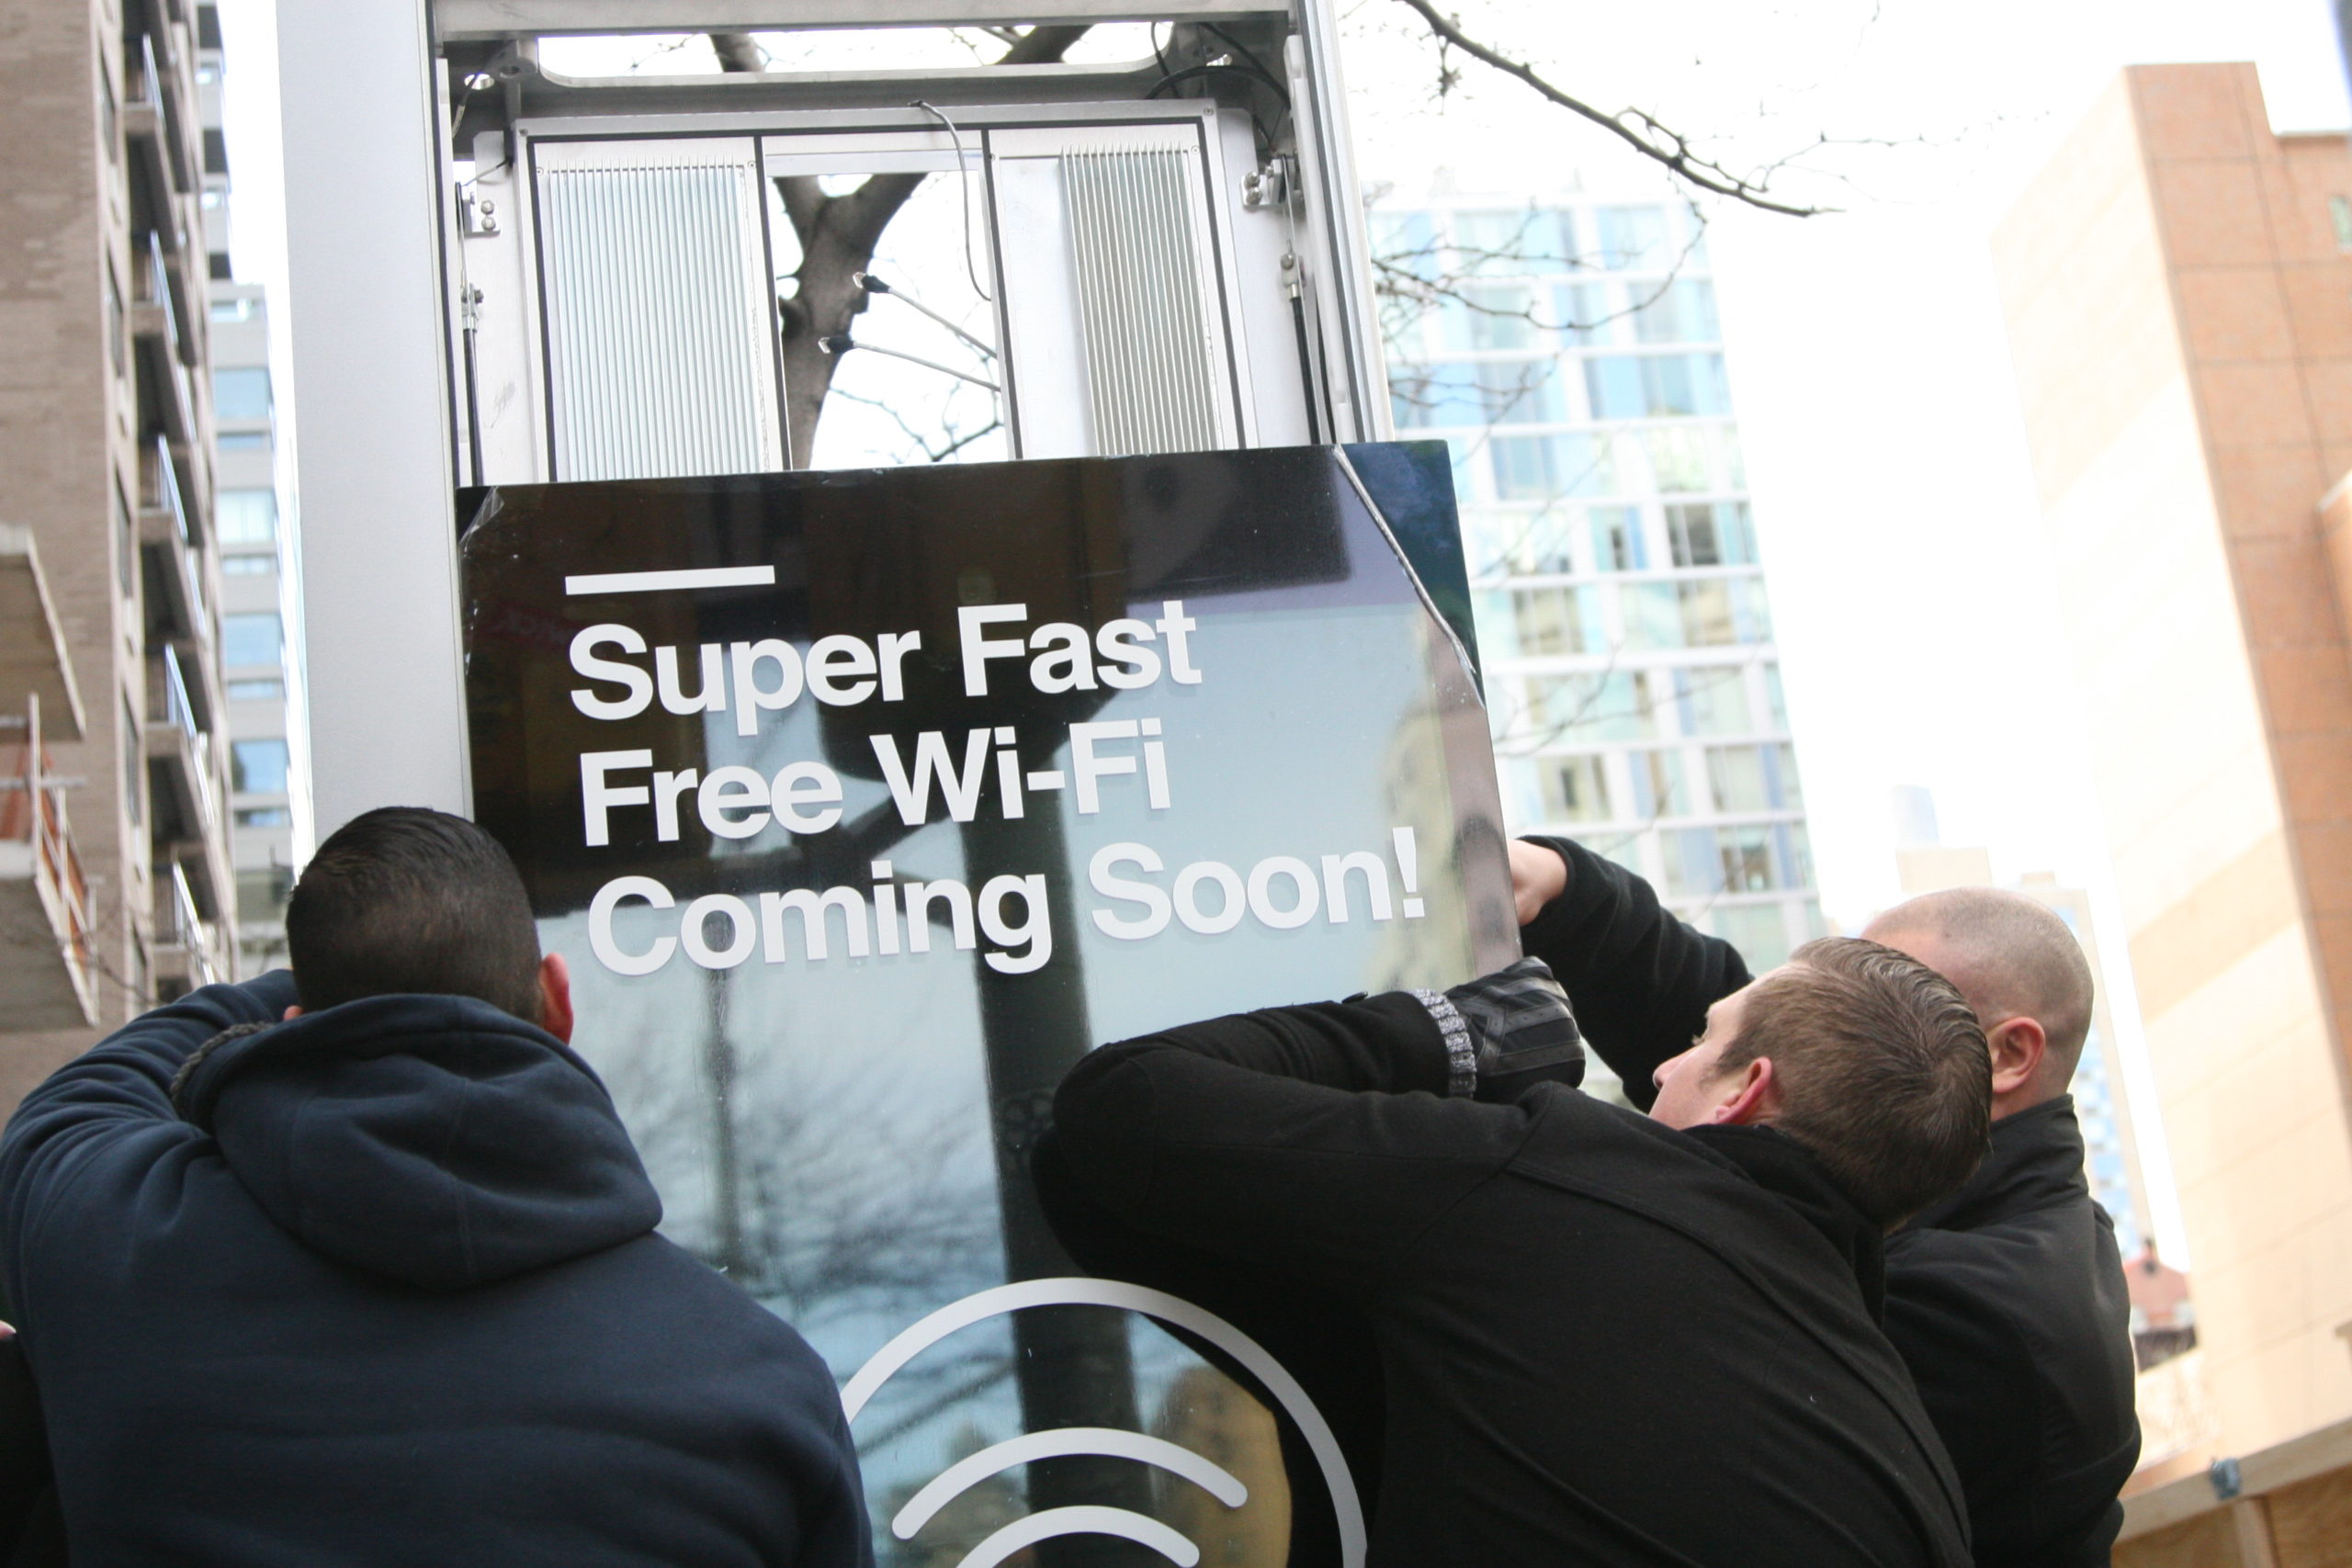 NYC’s New Gigabit Wi-Fi Hotspots Work Like Payphones From The Future